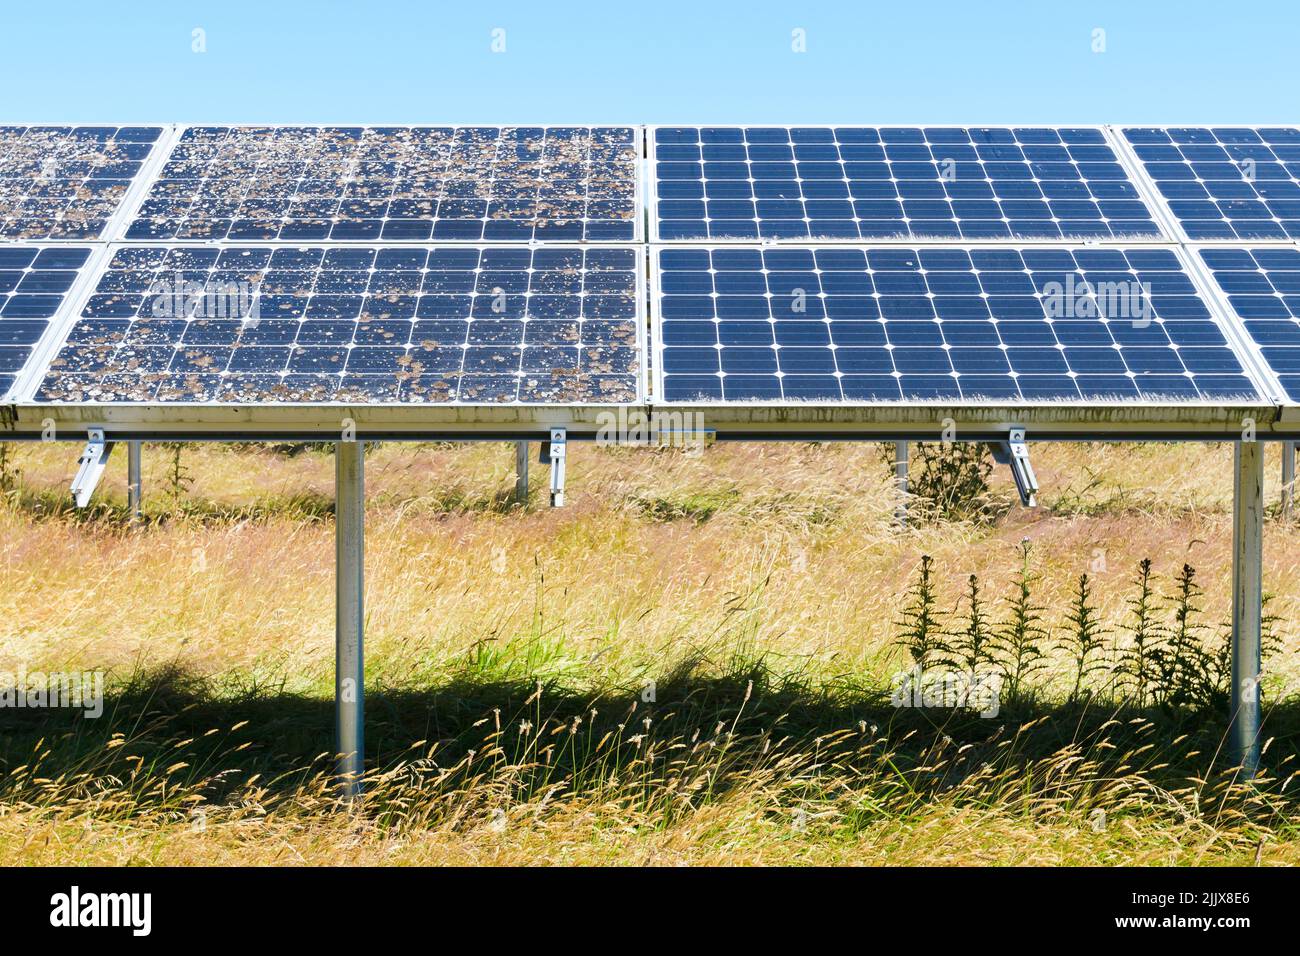 Contrast between clean and dirty solar panels in an array with the sections adjacent in a field of long grass Stock Photo